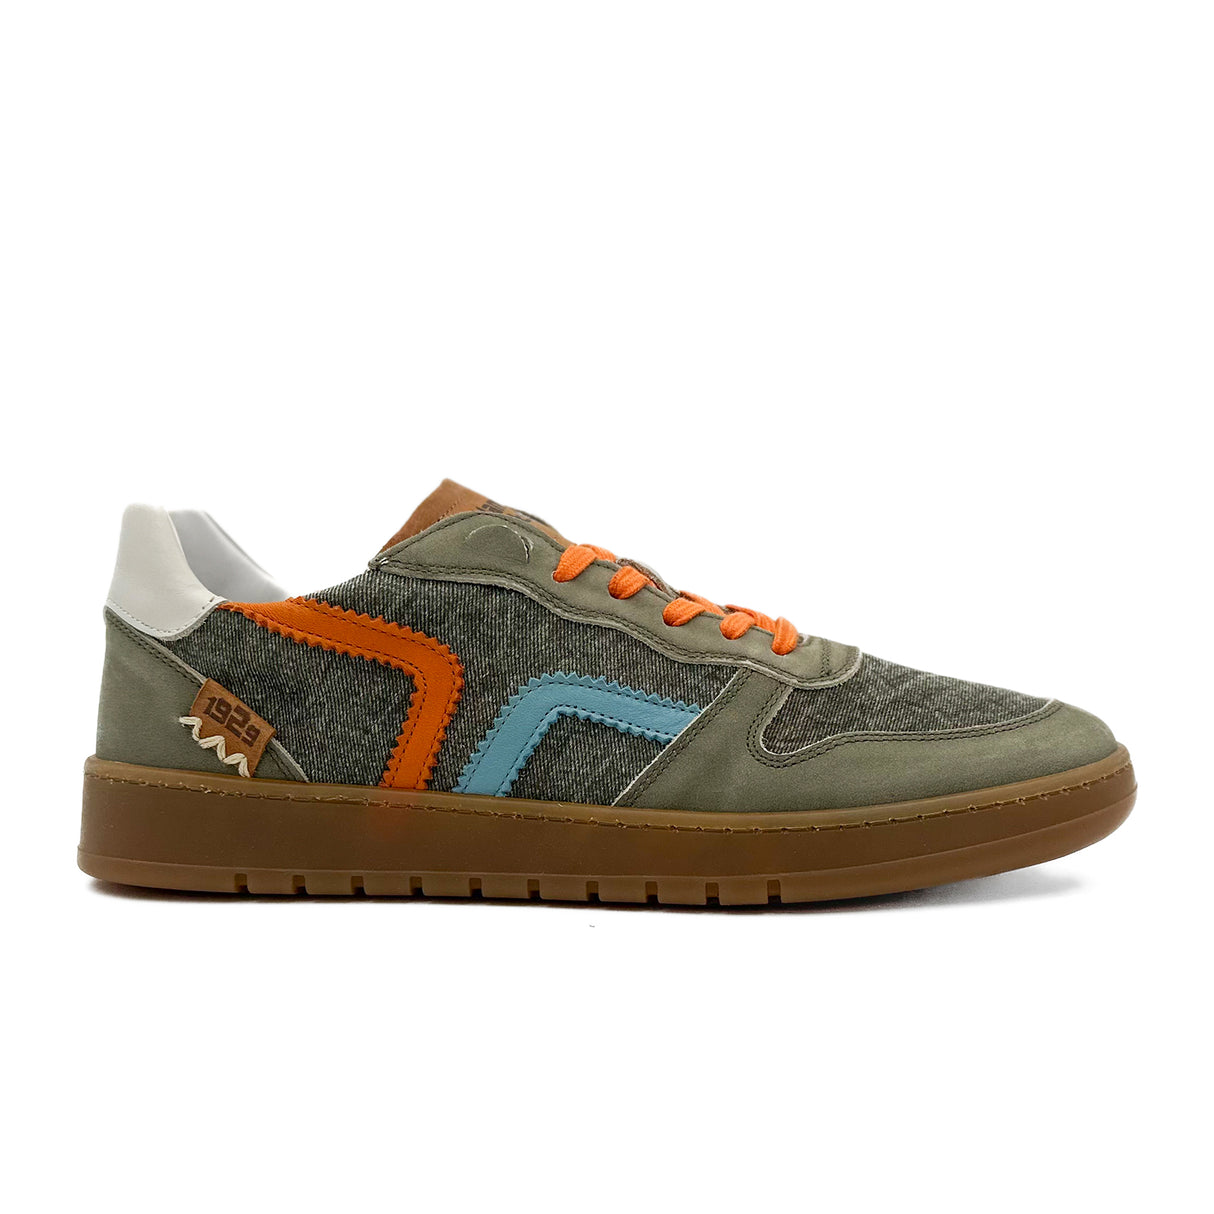 Kamo-Gutsu CAMPO 048 Sneaker (Men) - Medusa/Olive Athletic - Casual - Lace Up - The Heel Shoe Fitters